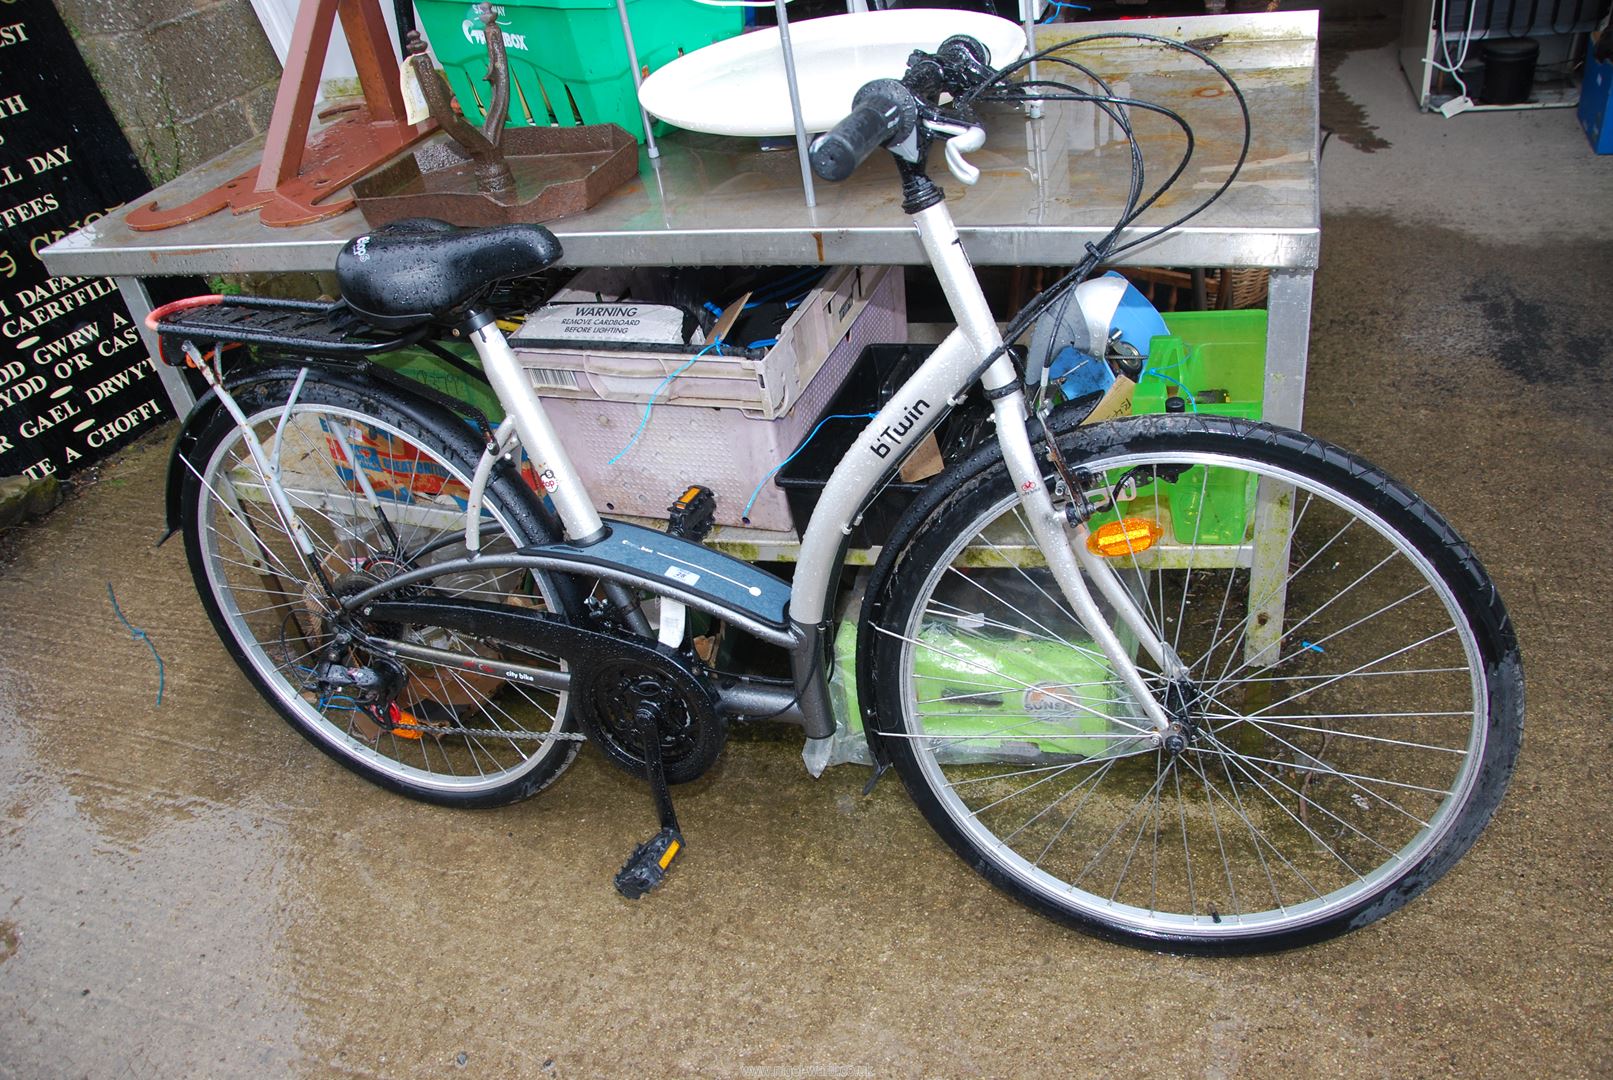 A B-twin 18 speed ladies push Bicycle with carrier rack.